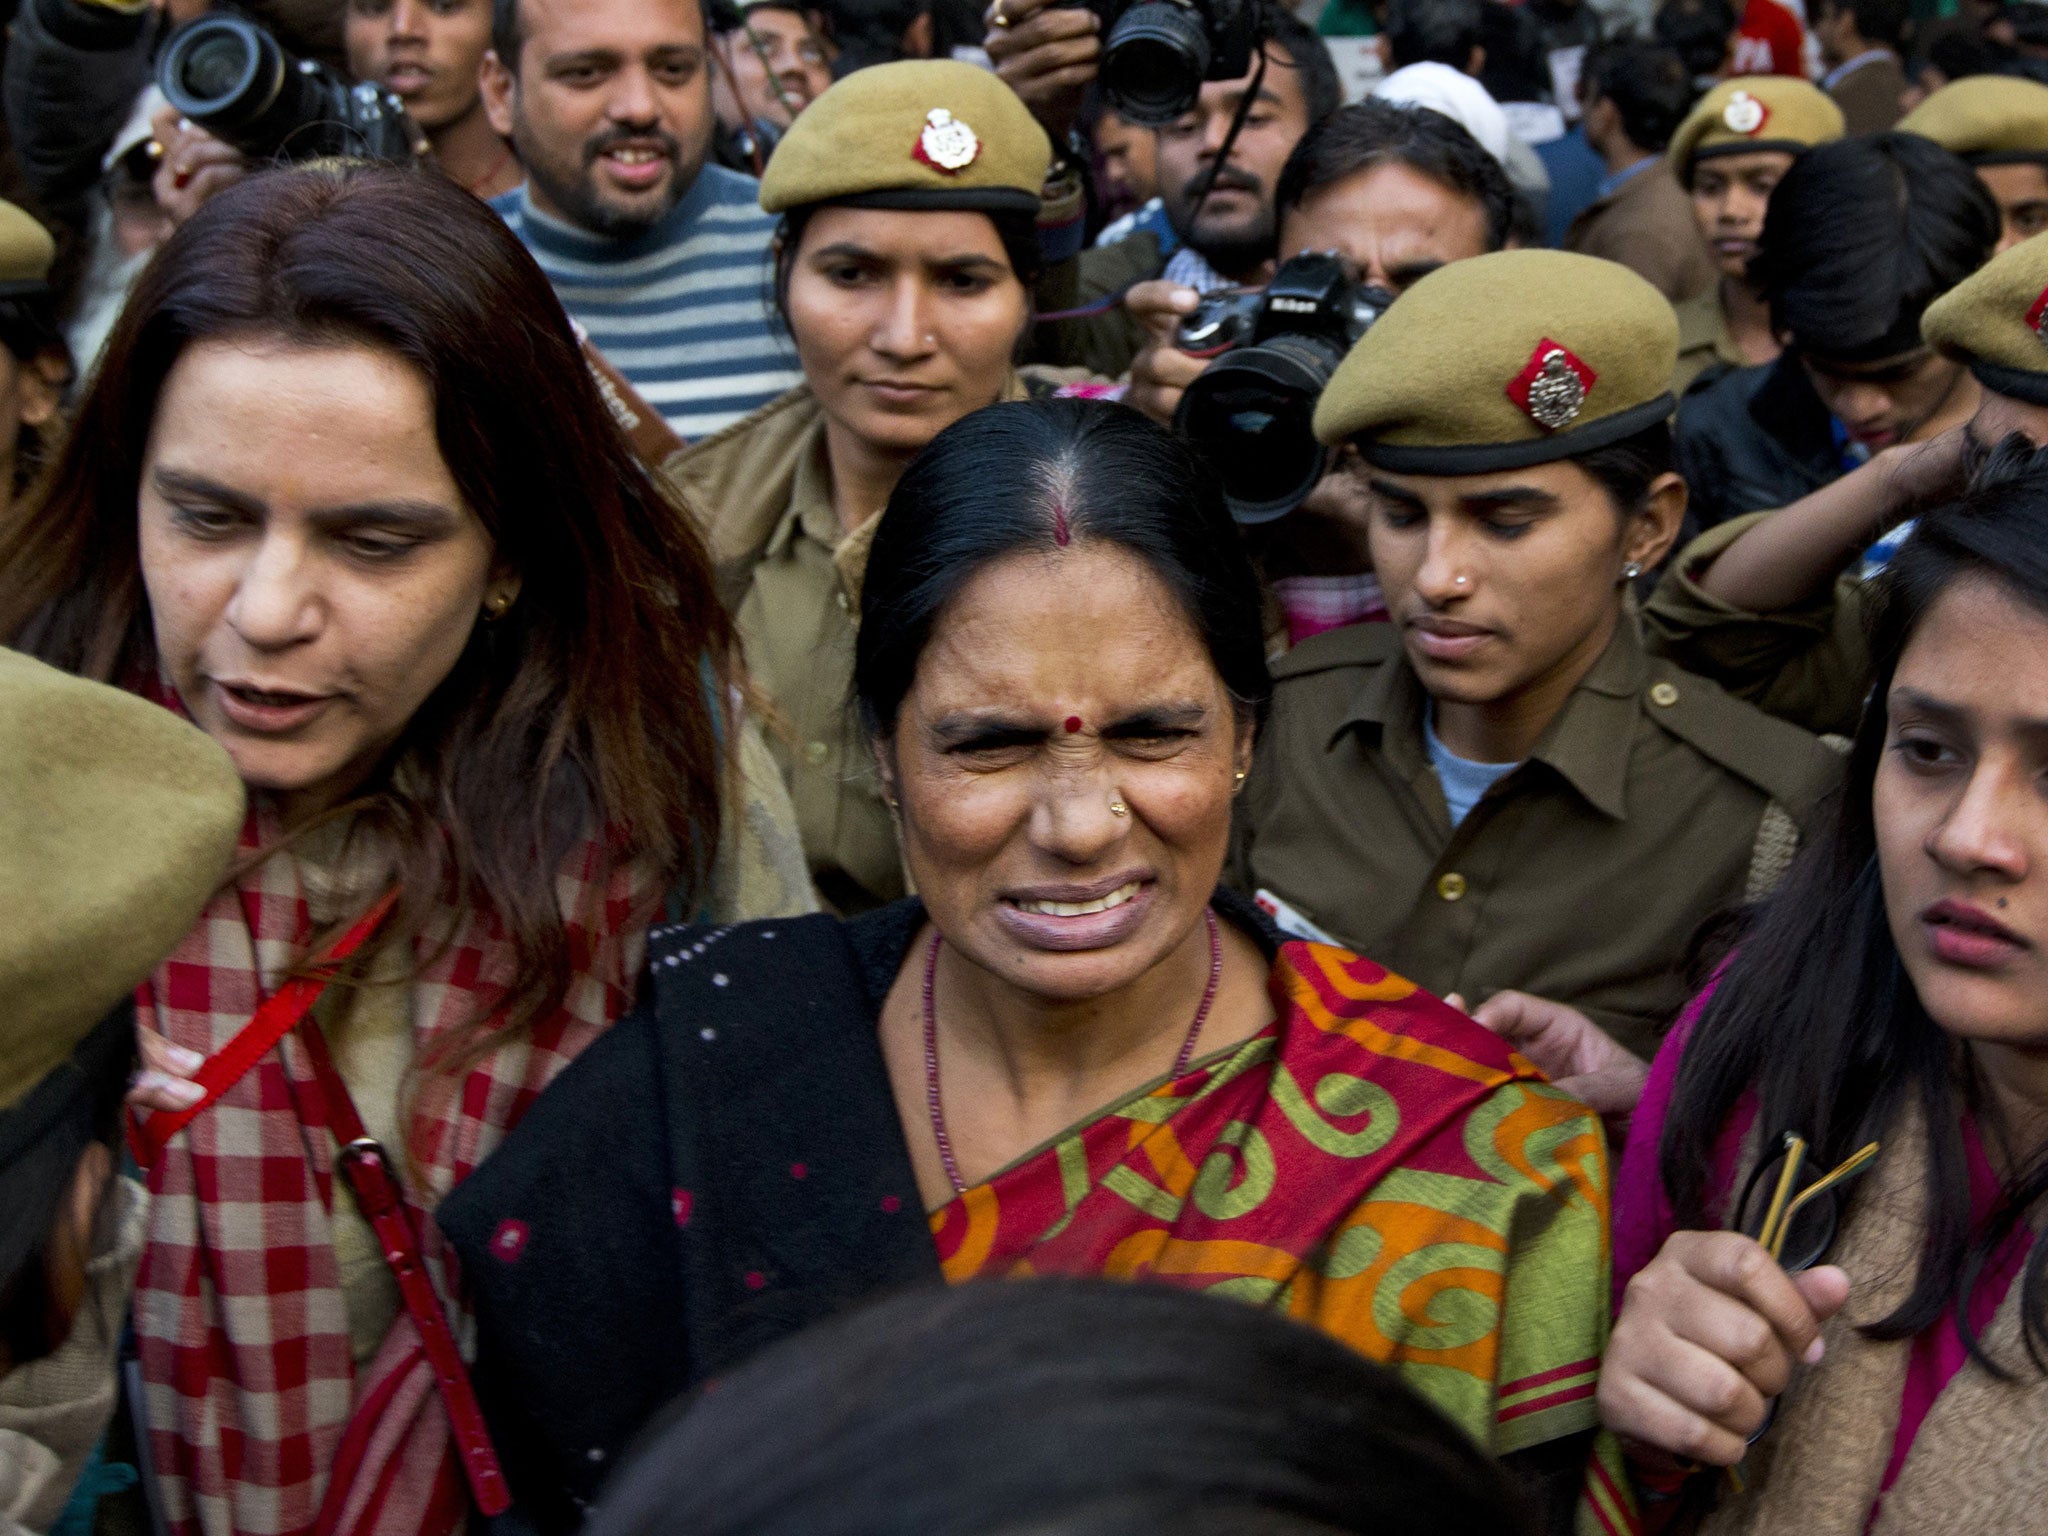 The mother of the victim of the fatal 2012 gang rape that shook India, arrives to lend her support at a protest in New Delhi, India, Monday, Dec. 21, 2015.